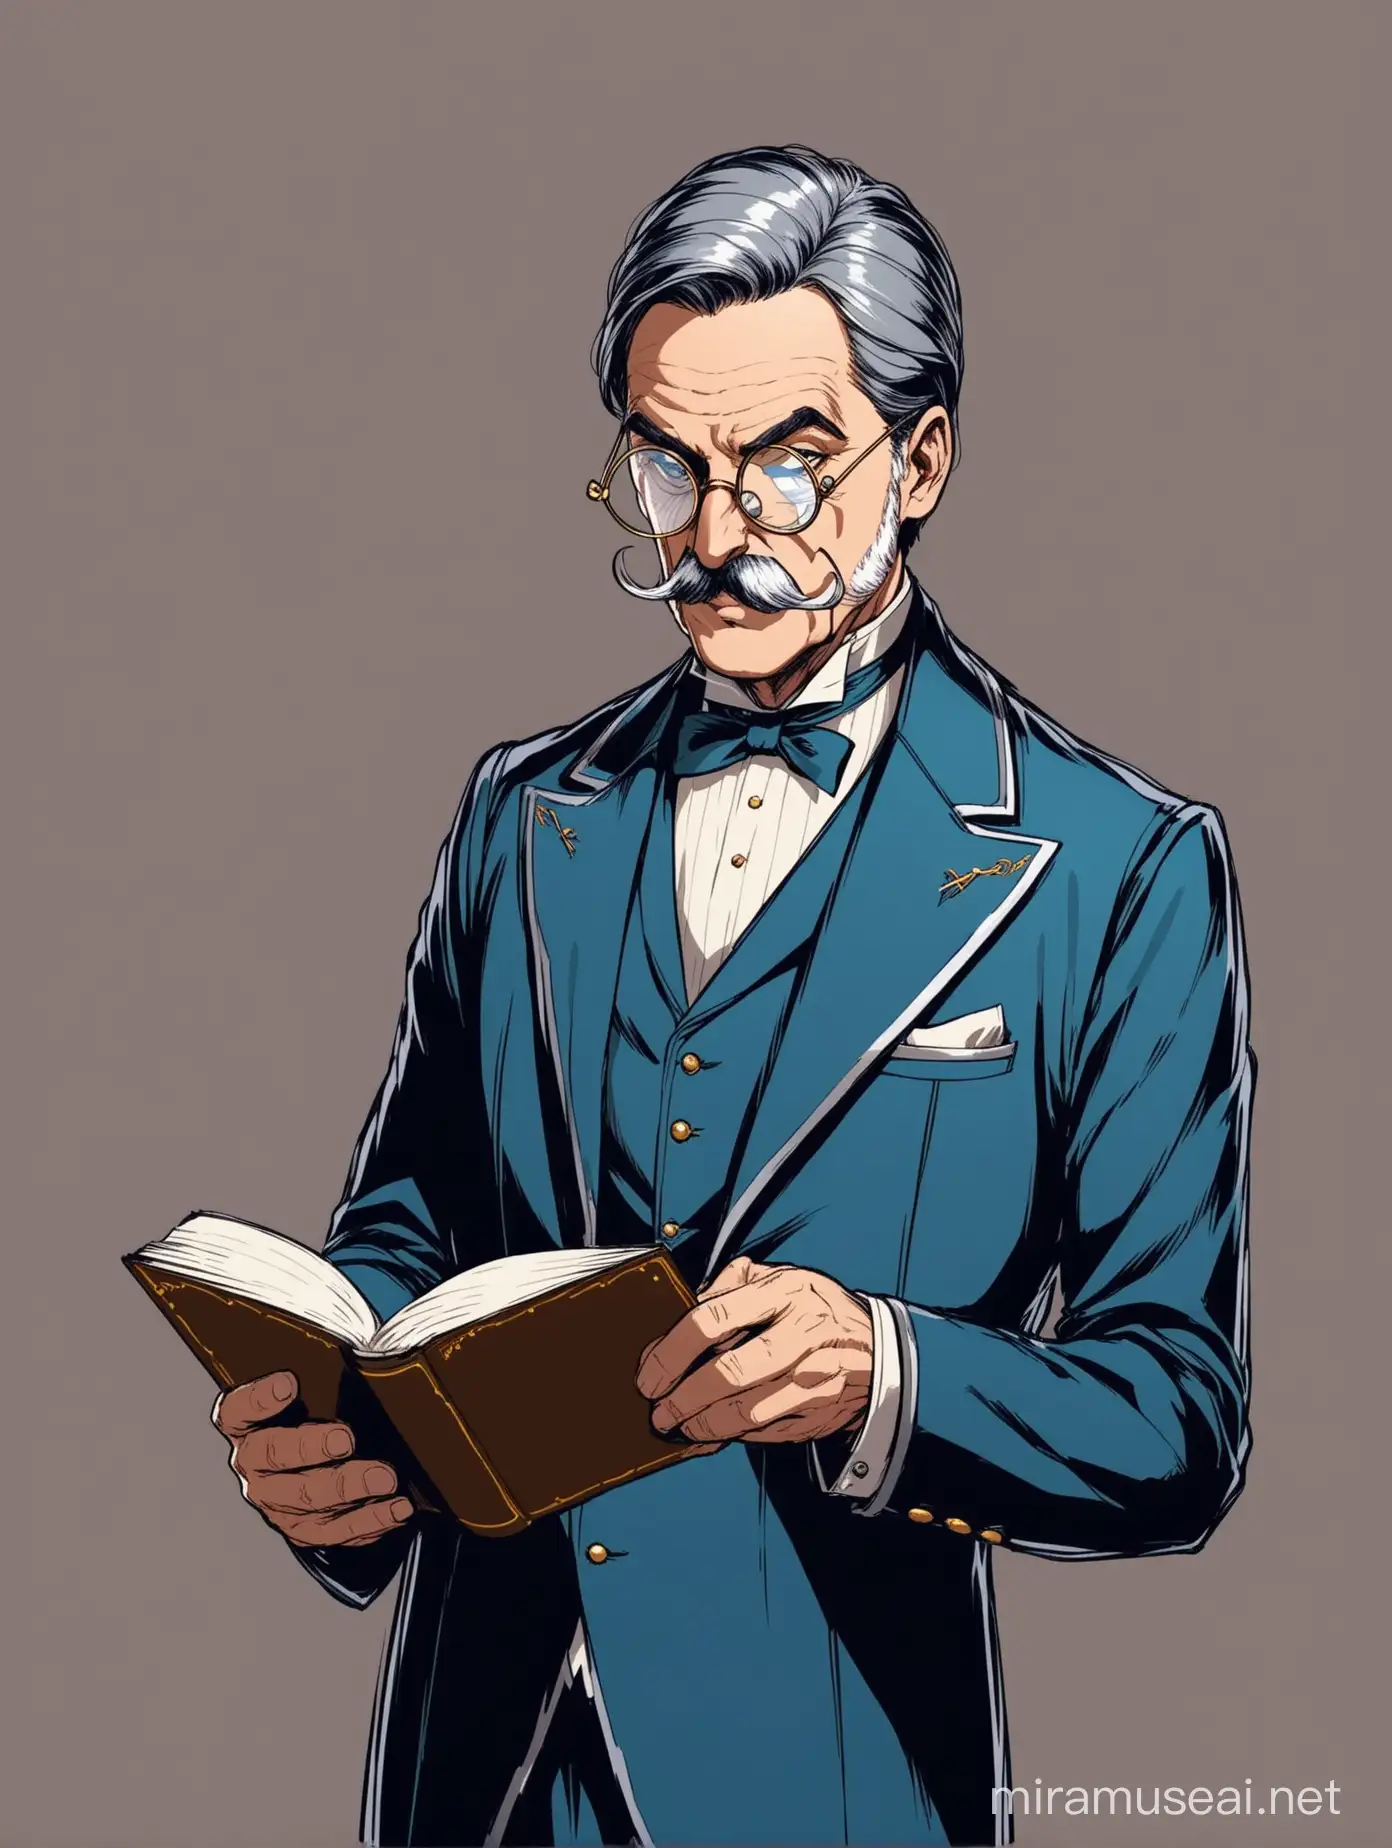 Make a 50 year old man with a blue and silver noble suit on. This man is sophisticated and has an eye monocle. He is tall and lanky. He is holding a book and reading it